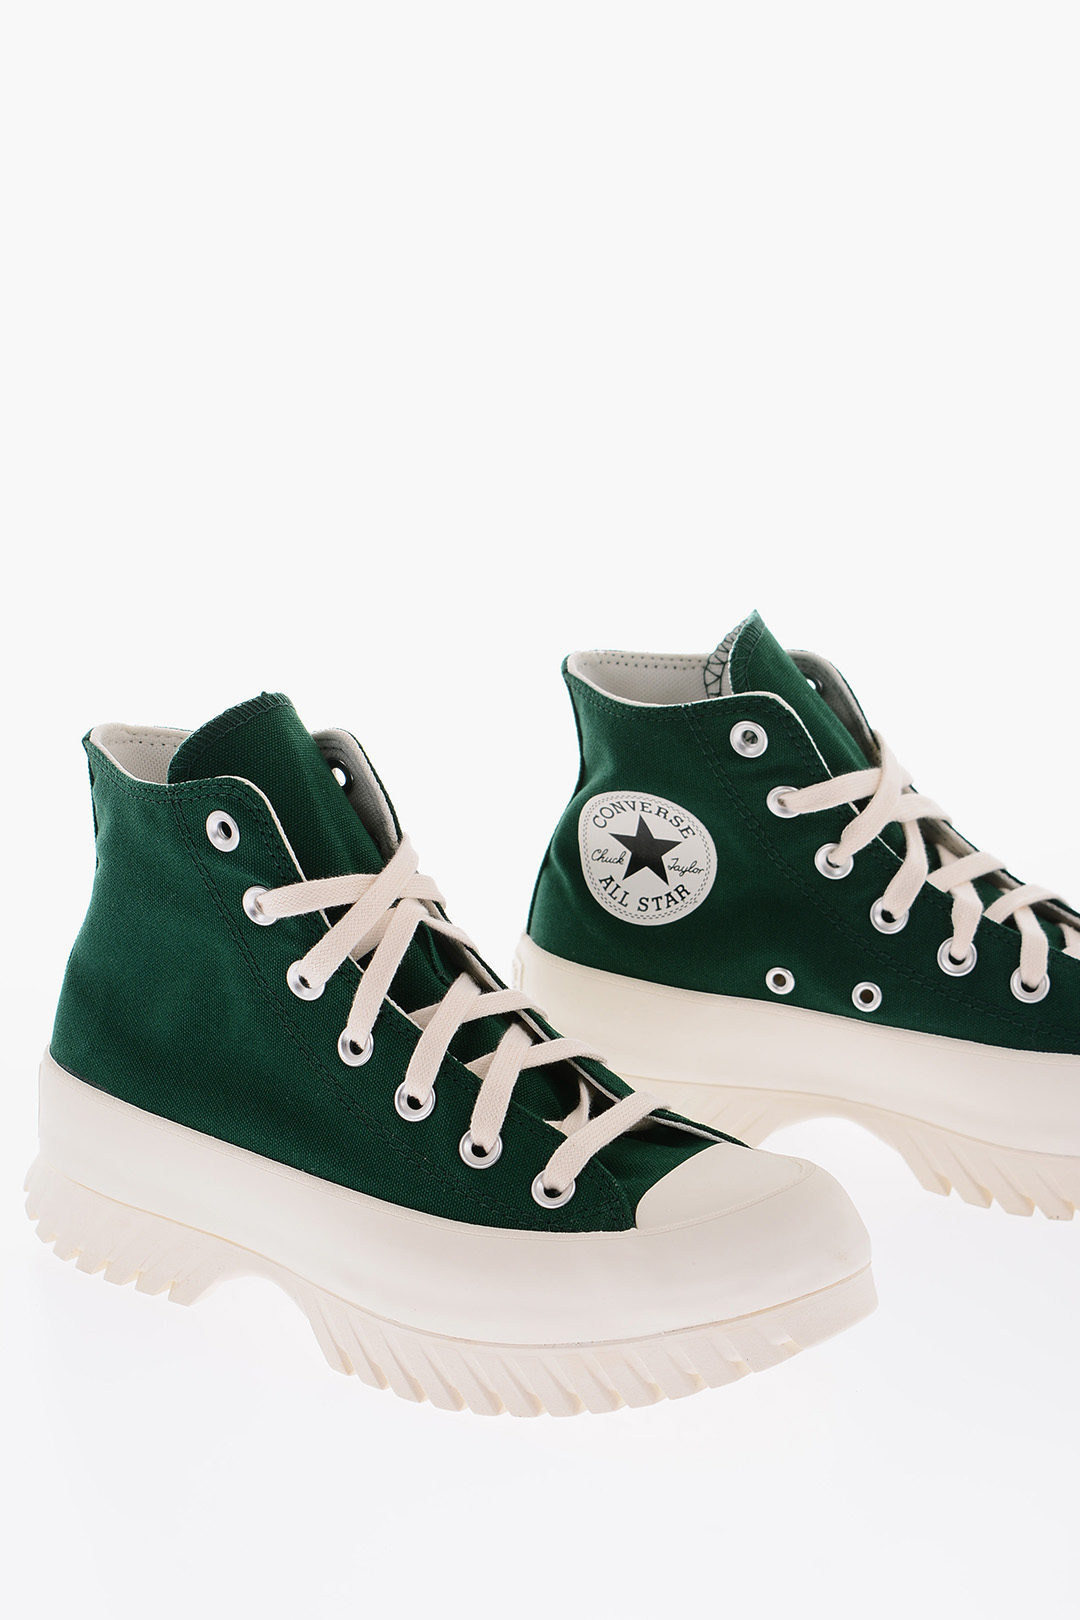 Converse ALL STAR CHUCK TAYLOR 5cm Track Sole Sneakers women - Glamood